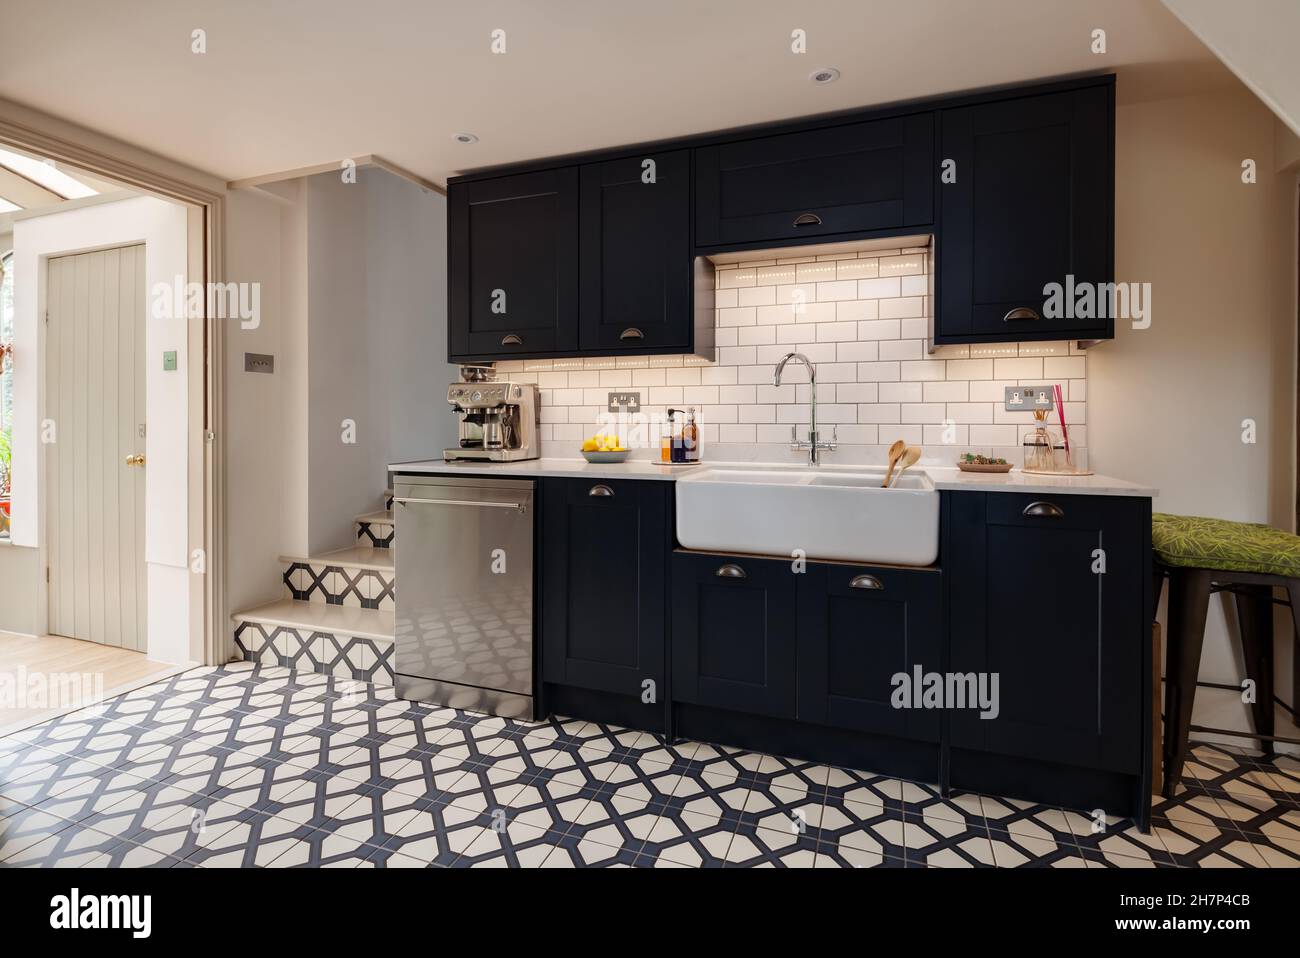 Great Wratting, Suffolk - August 21 2019: Cottage kitchen with distinctive traditional tile floor and striking black coloured cabinetry incorporating Stock Photo